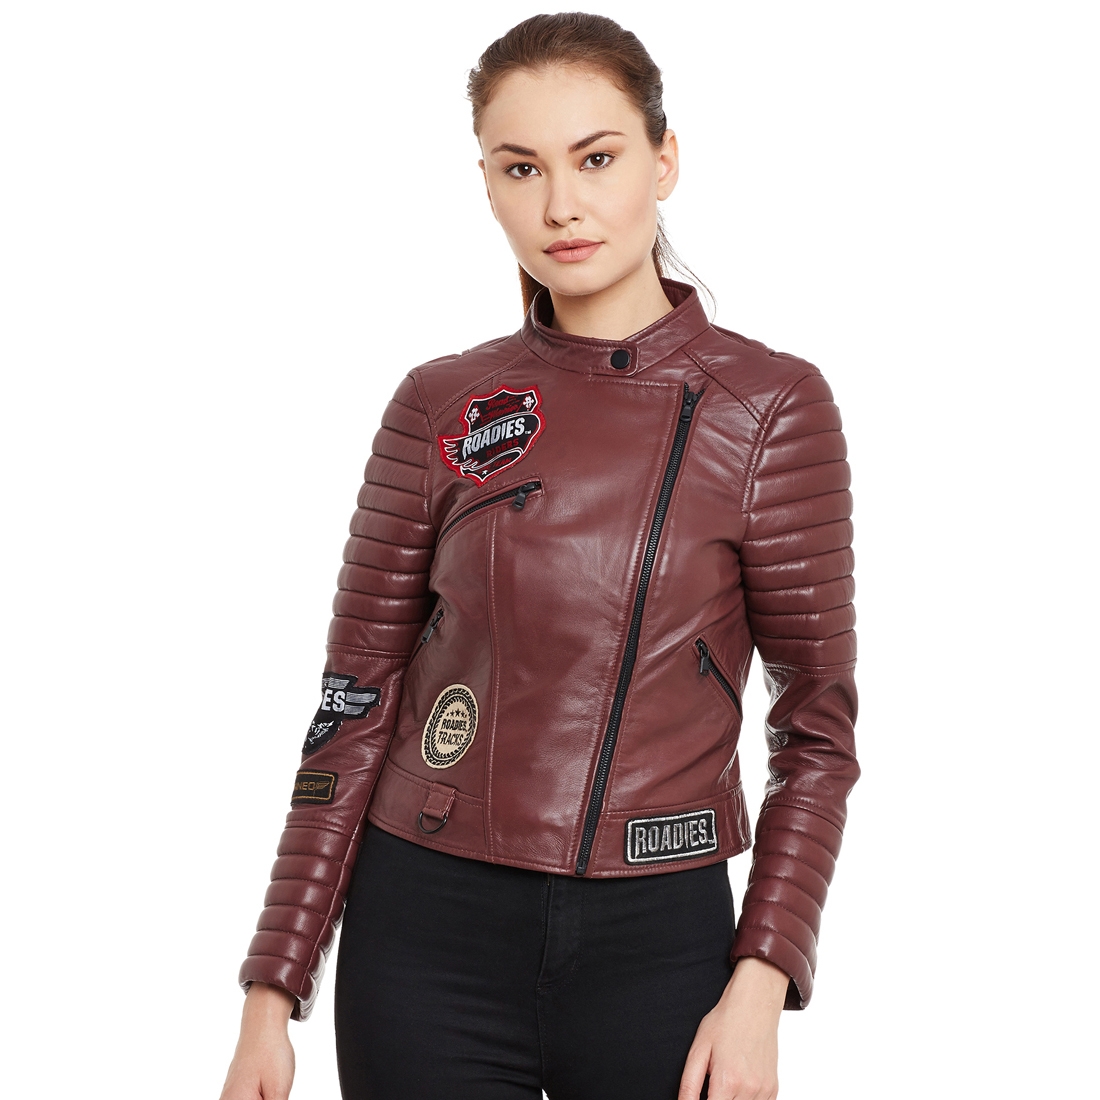 Justanned | Justanned Burgundy Women's Leather Jacket